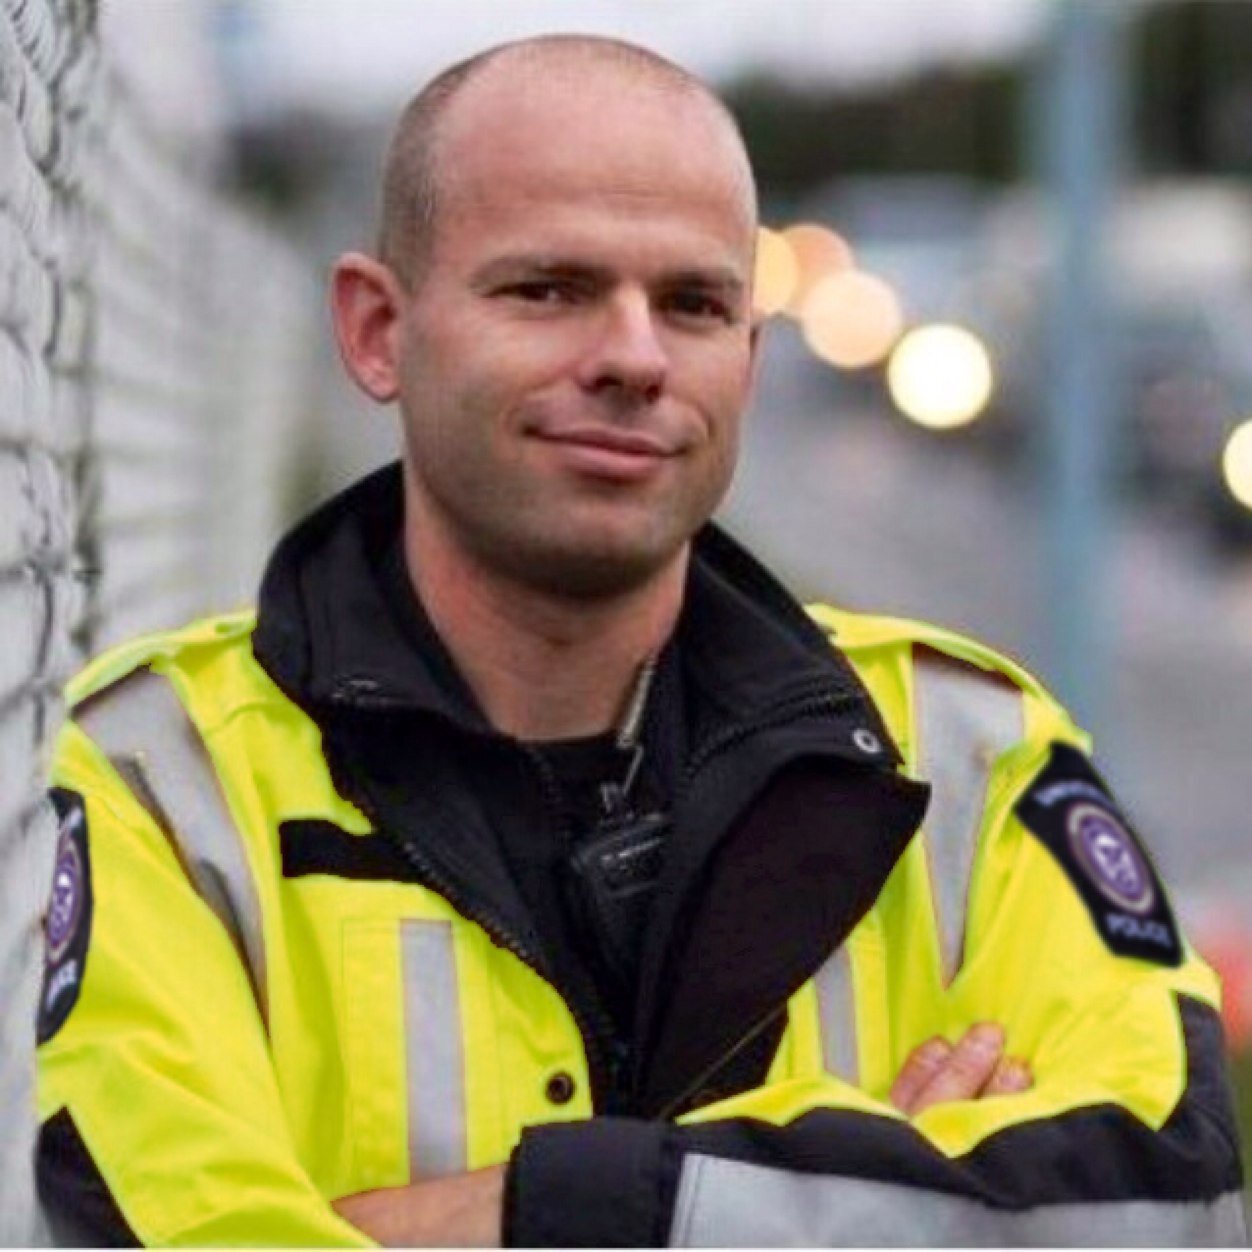 Patrol Sgt & Master Police Motorcycle Instructor, Expert in Collision Reconstruction. Over 28 years of policing experience in Ontario & BC. Husband & father